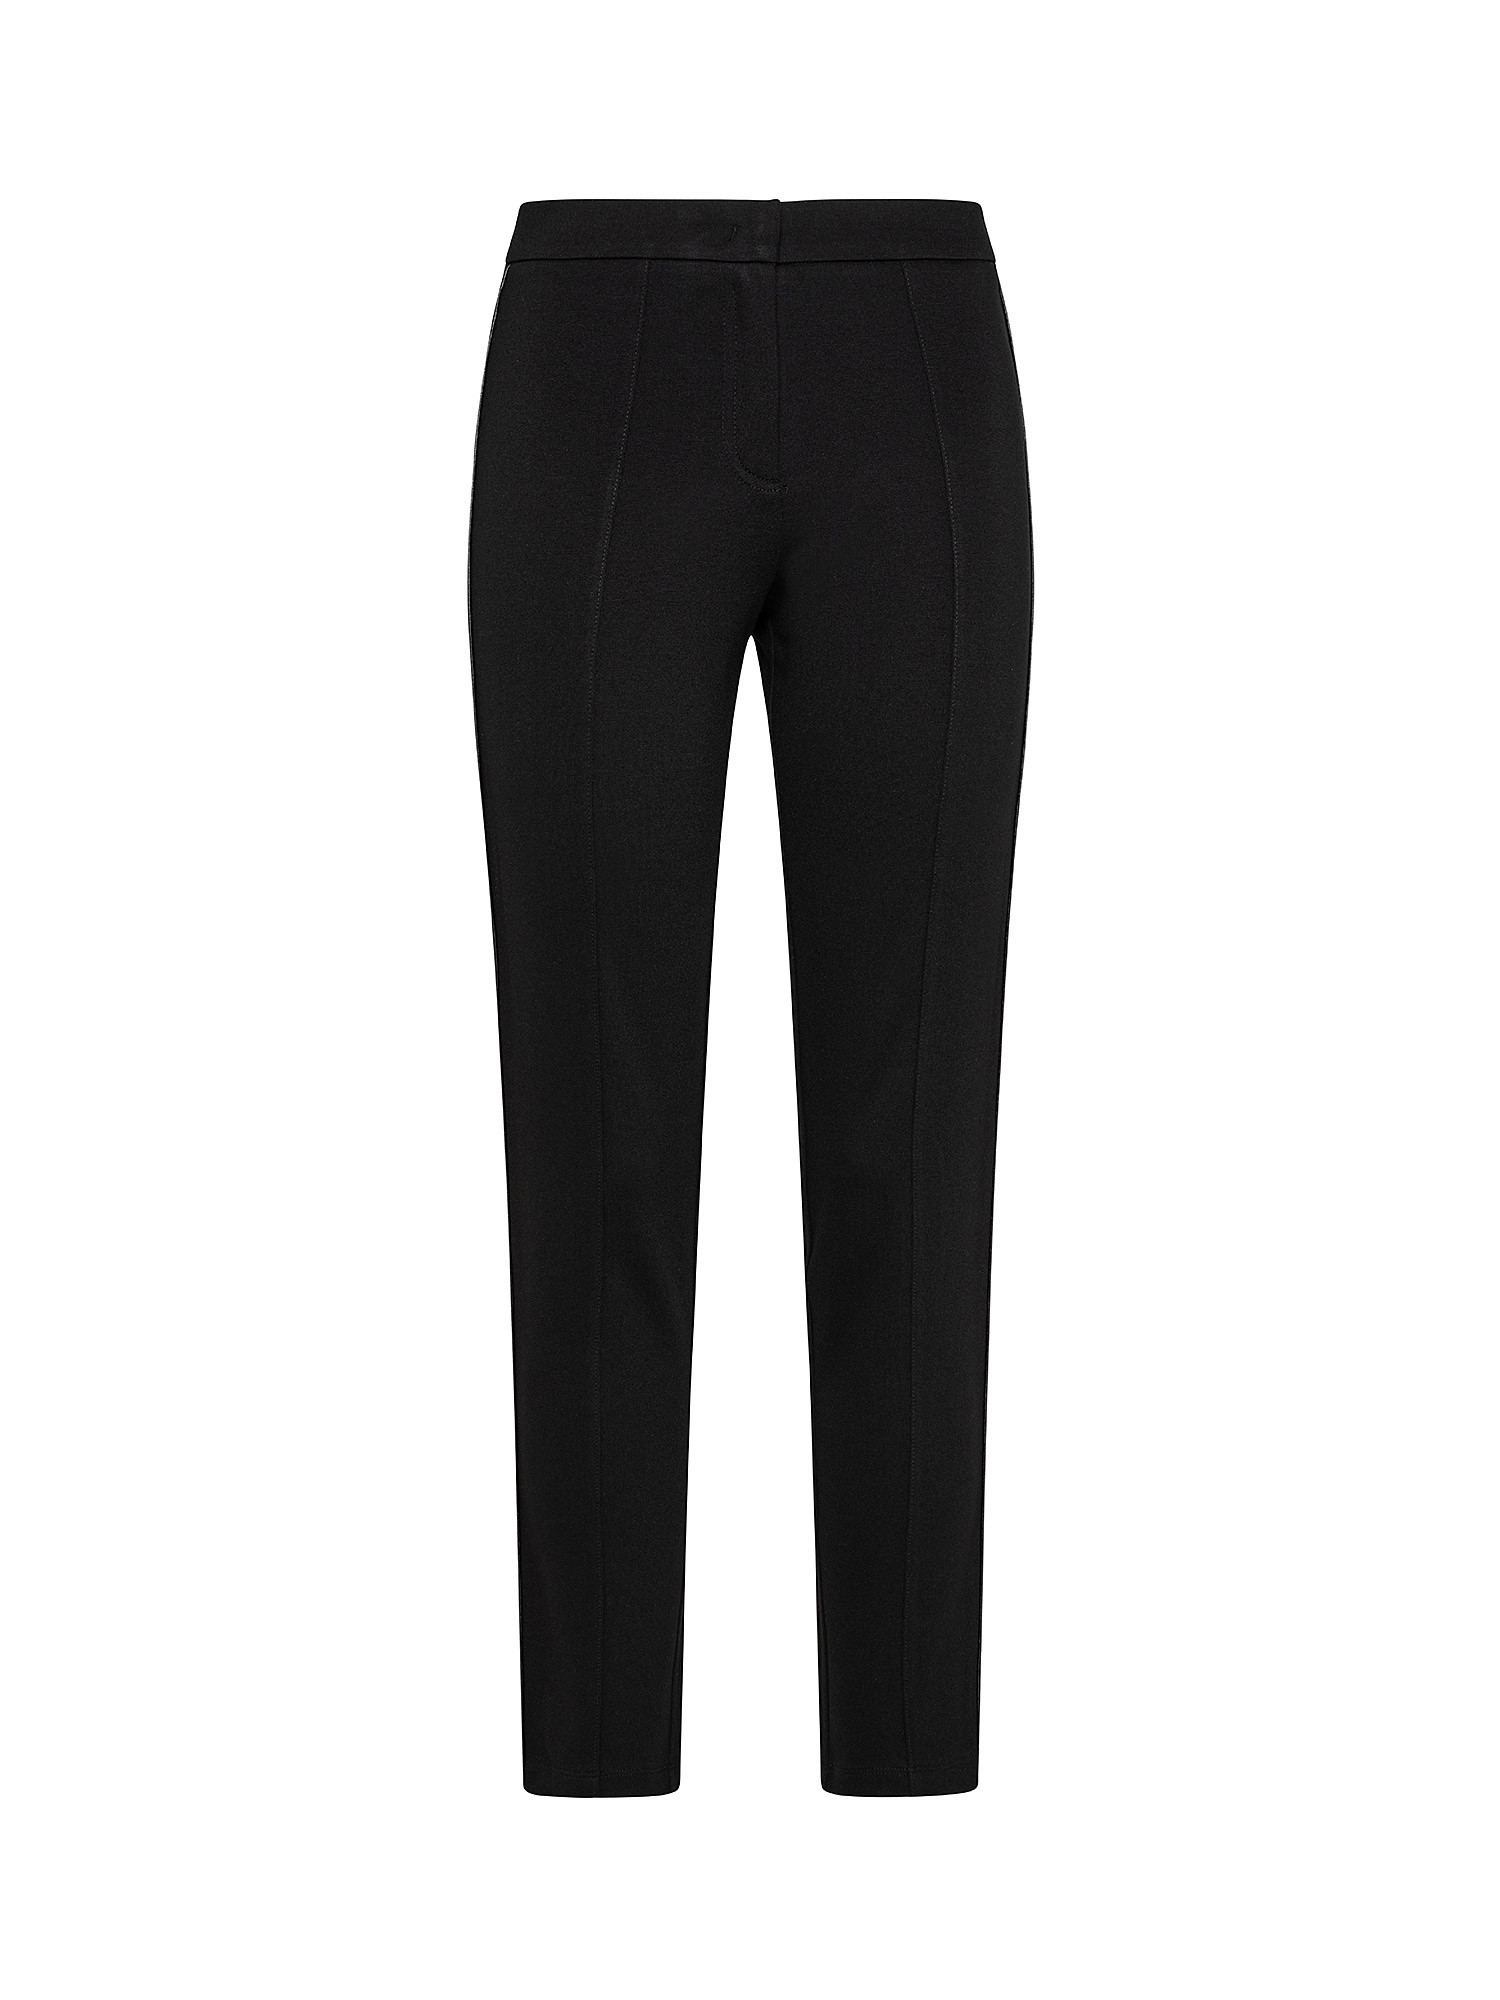 Tapered leg trousers, Black, large image number 0